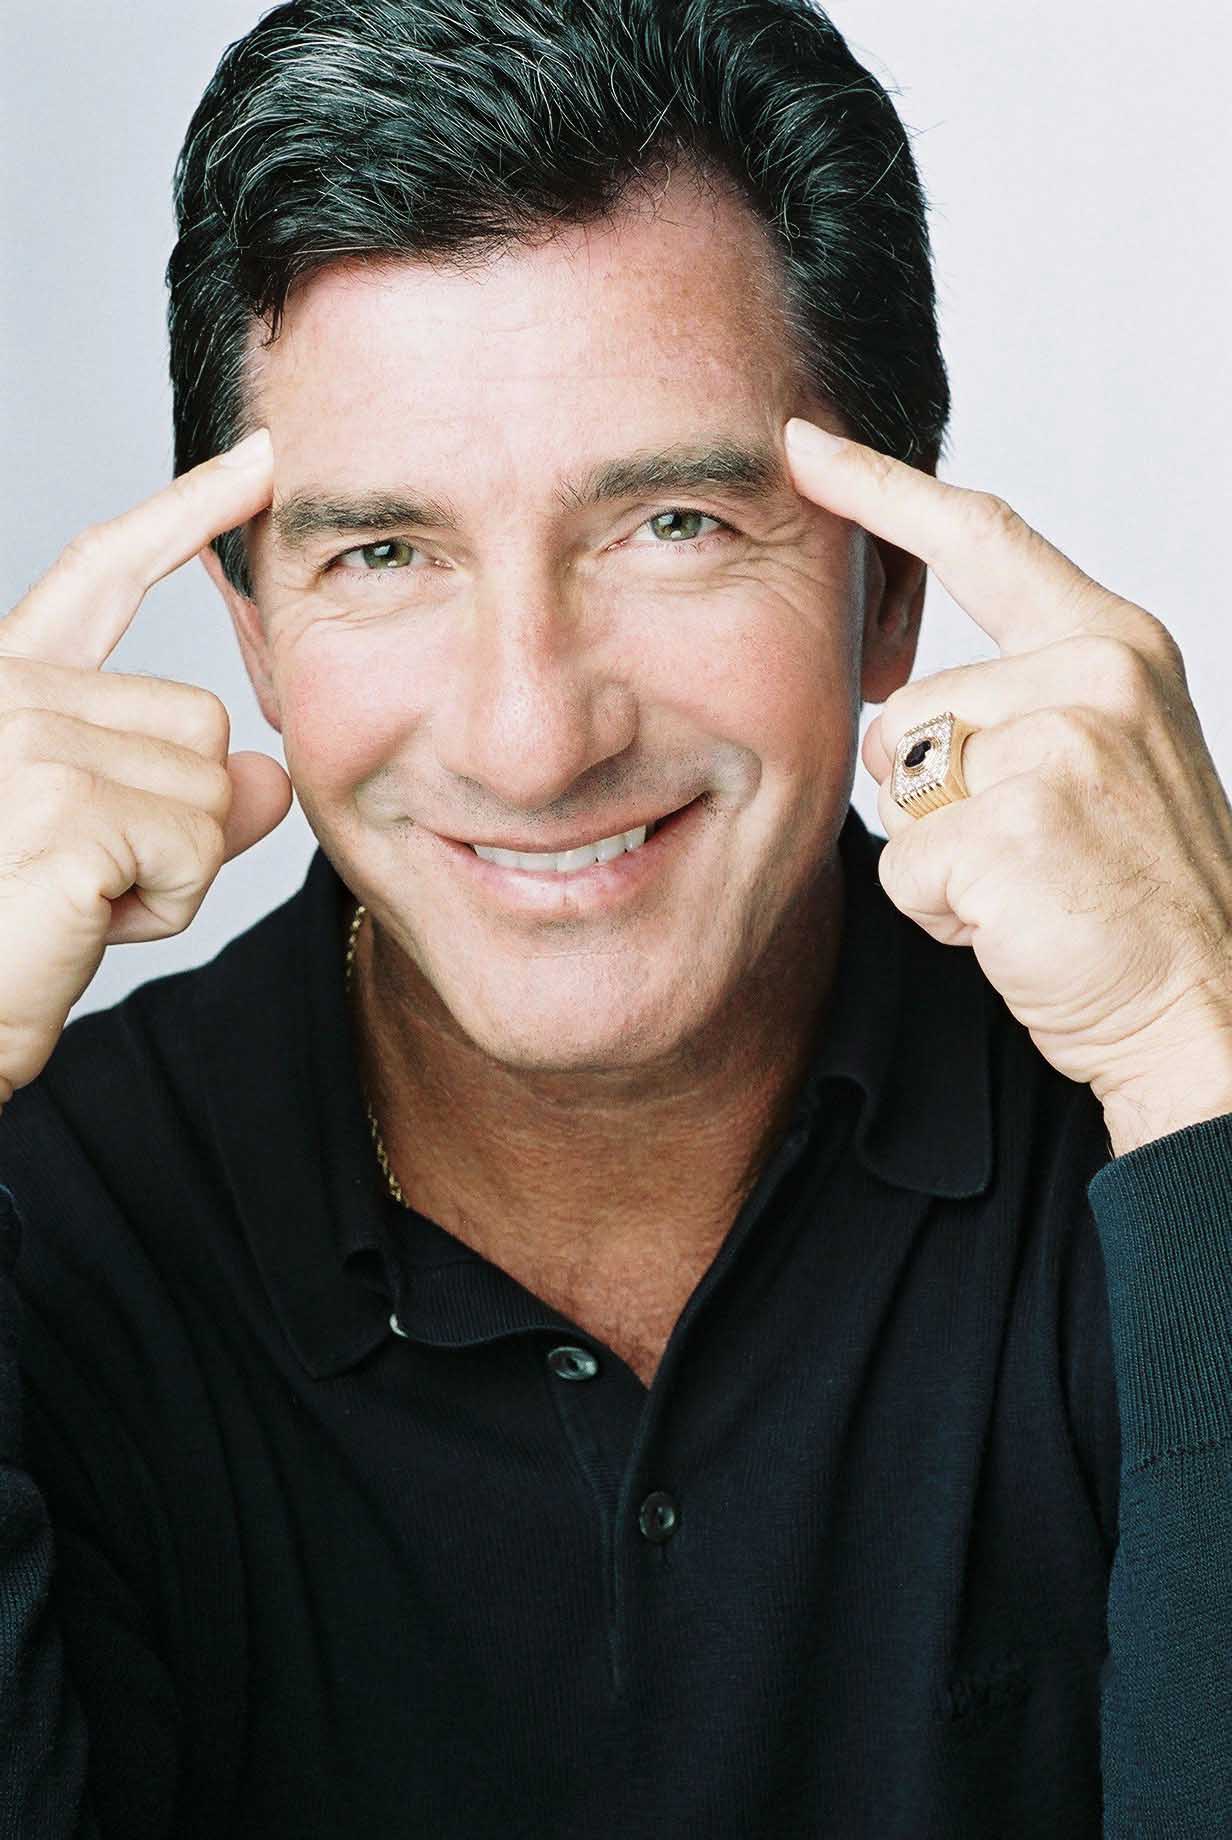 20 Powerful and Life Changing T. Harv Eker Quotes